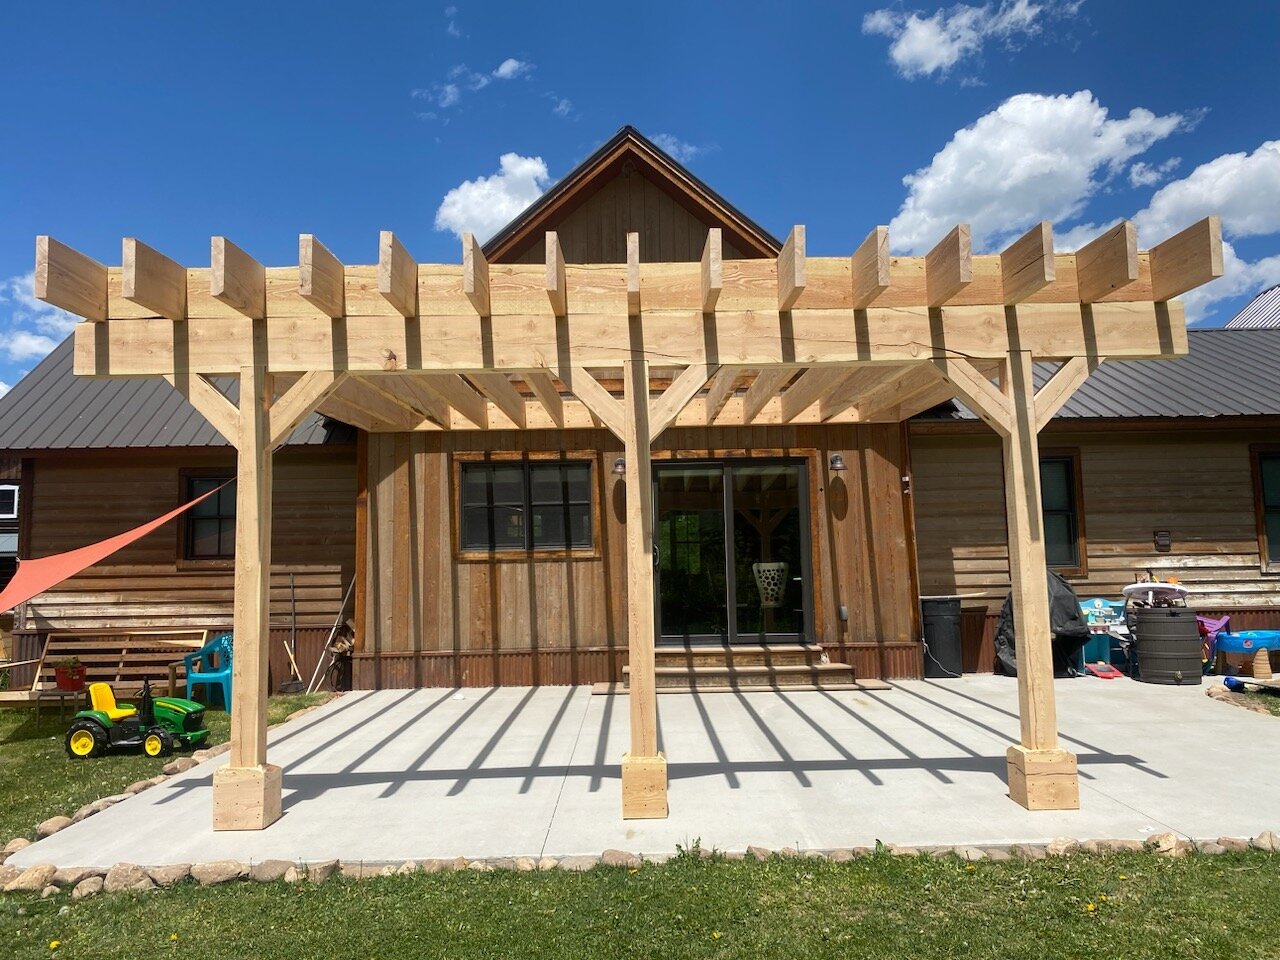 Ready to build your perfect outdoor project?

We'd love to help provide our top-quality lumber for your pergolas, decks, and patios to elevate your outdoor space.

Use the link below to request a quote so we can start bringing your vision to life!

h